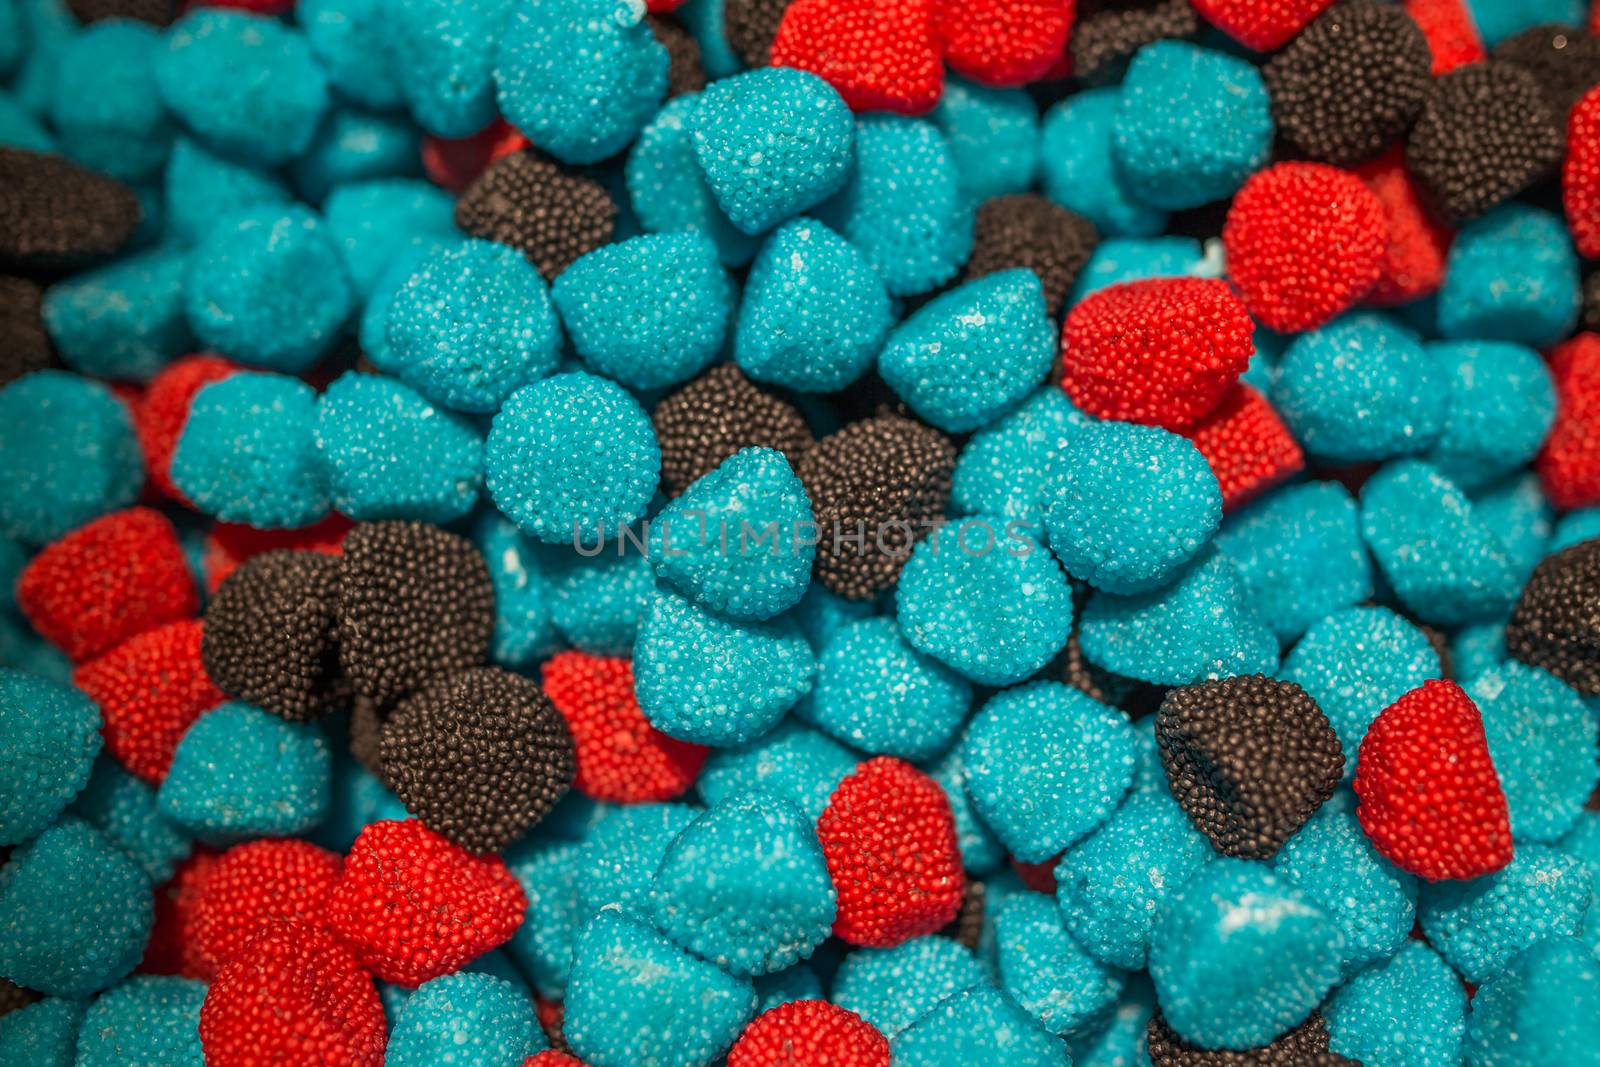 Blue black and red jelly candies in the form of raspberries and blackberries.